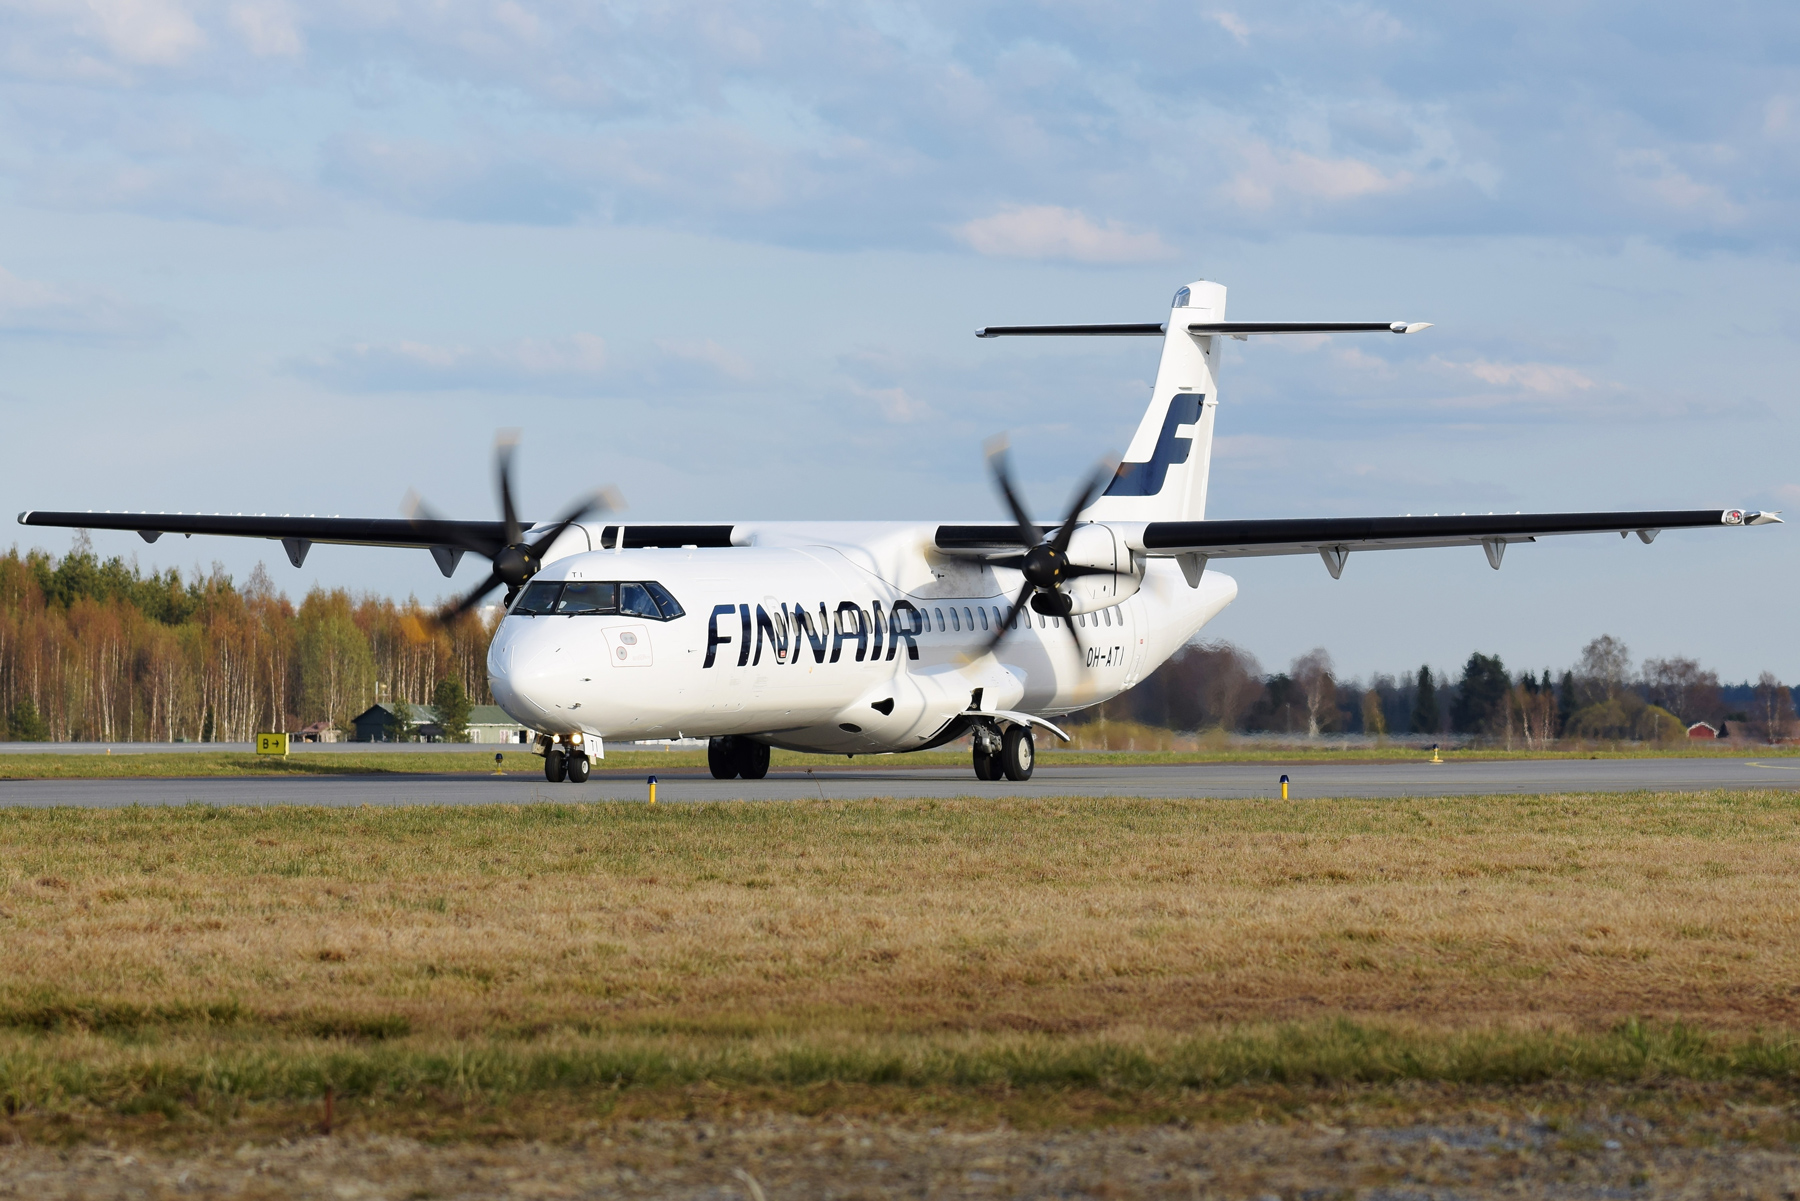 Finnair signs a 10-year maintenance contract with ATR